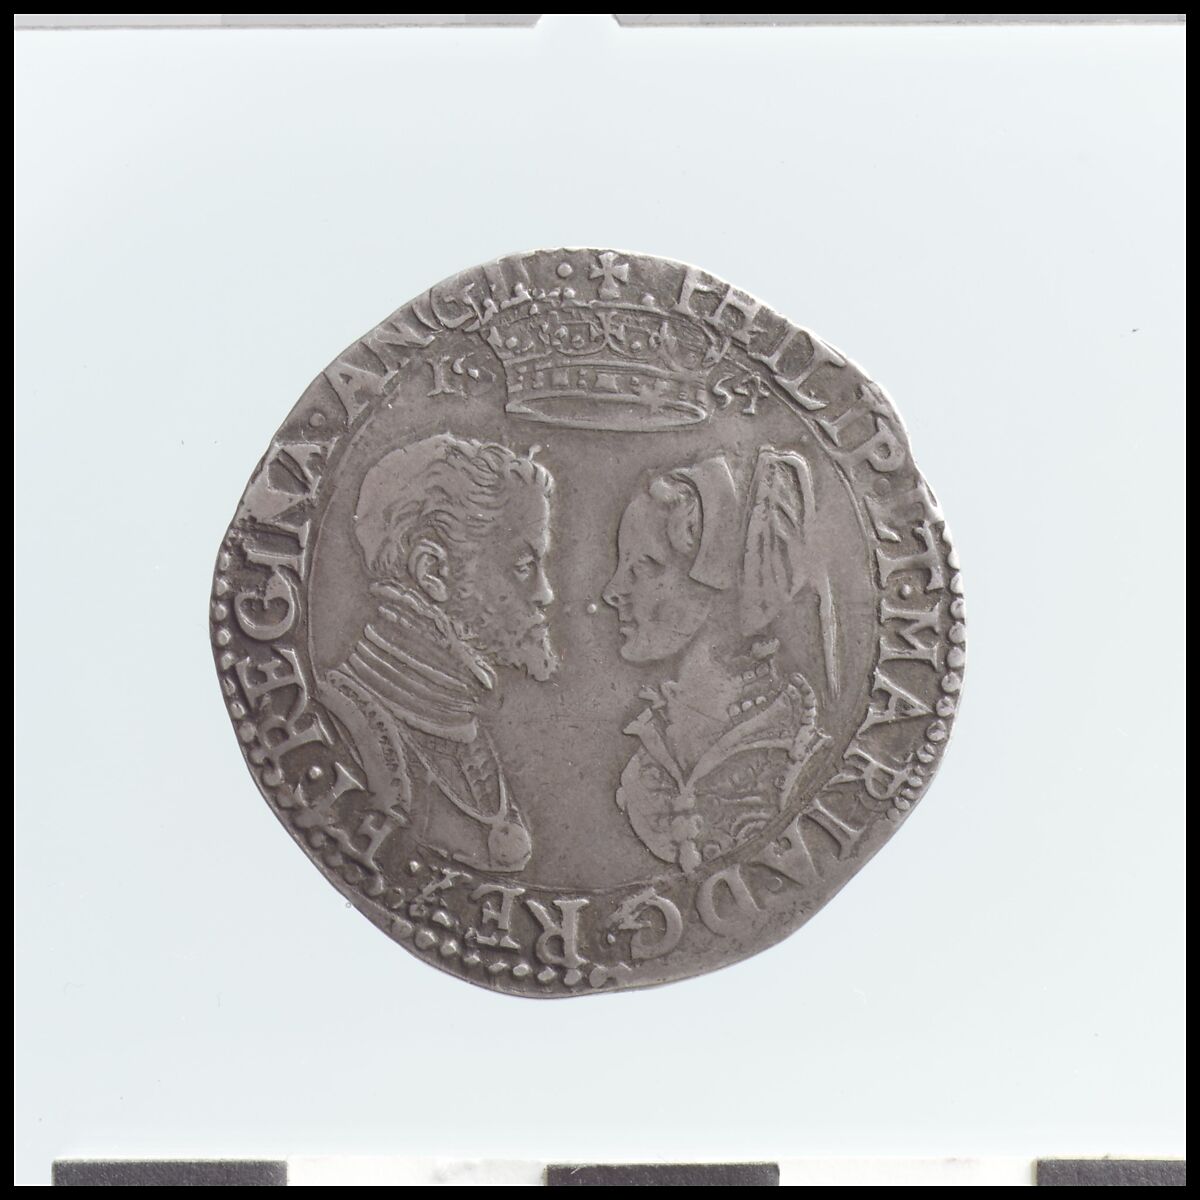 Shilling of Philip and Mary, Silver, British